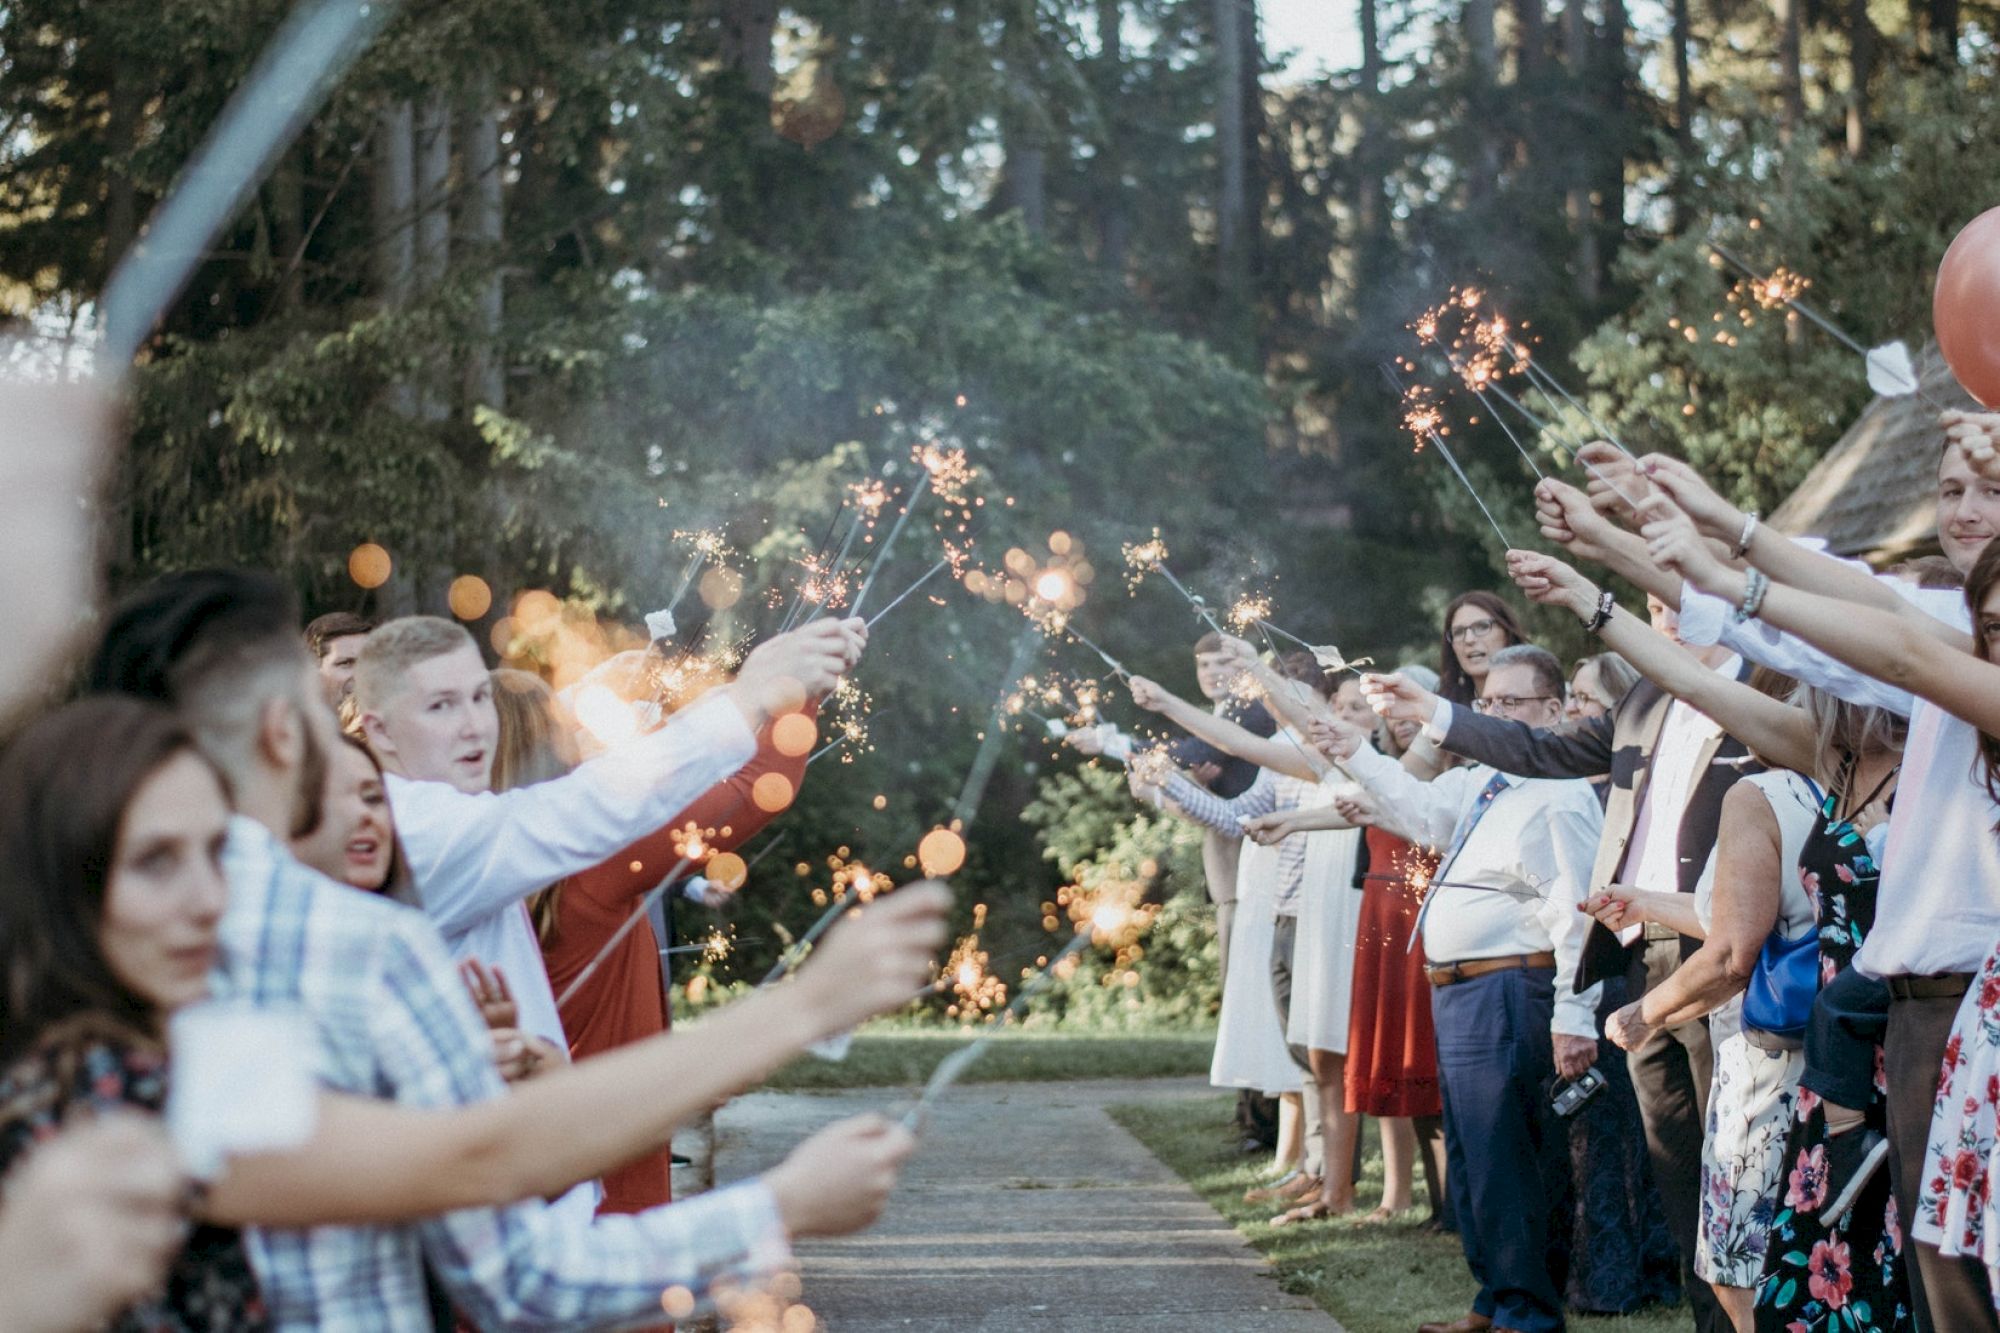 A group of people, likely at a celebration or wedding, are standing in two lines holding sparklers, creating a festive atmosphere.